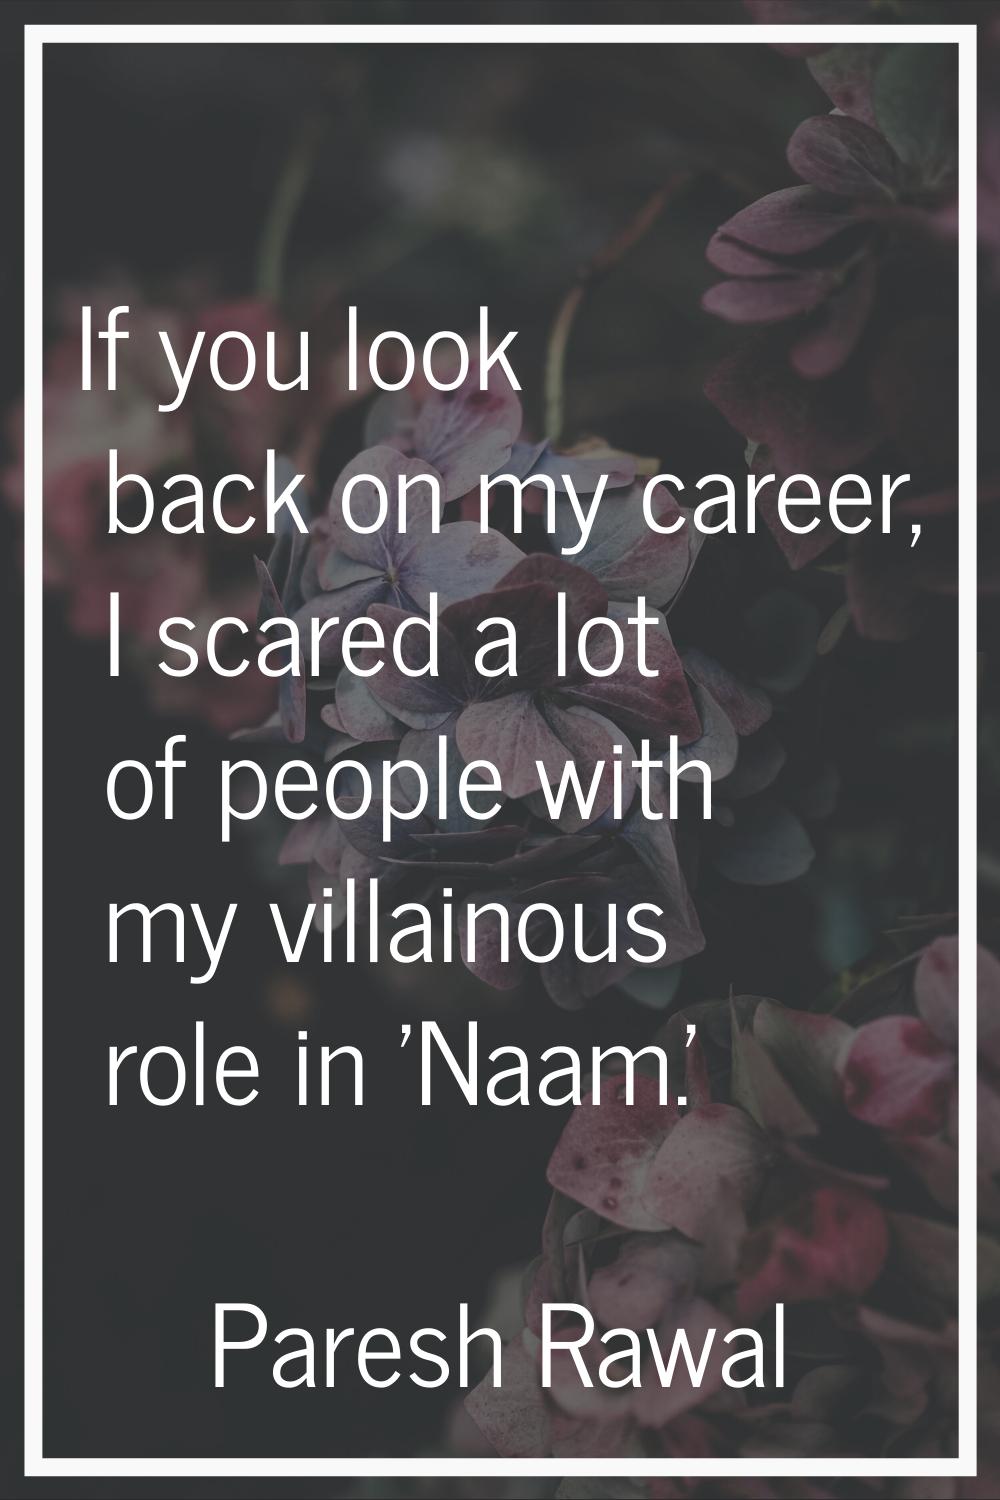 If you look back on my career, I scared a lot of people with my villainous role in 'Naam.'